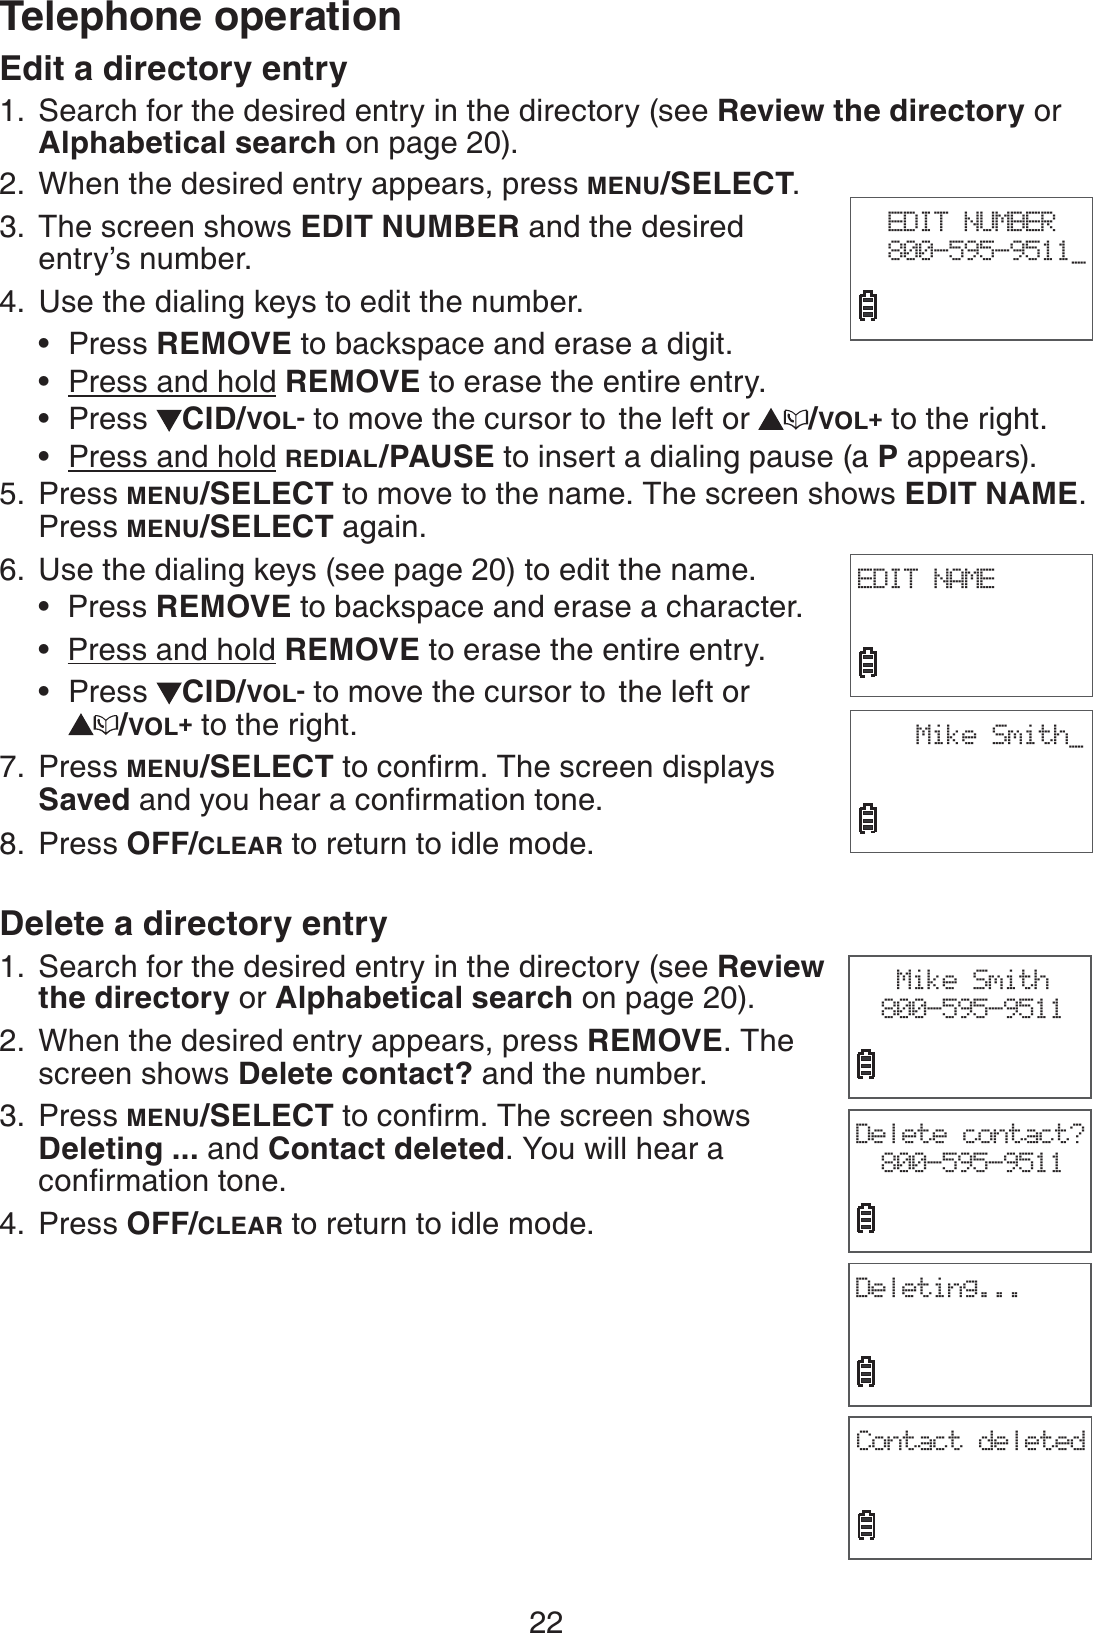 22Telephone operationEdit a directory entrySearch for the desired entry in the directory (see Review the directory or Alphabetical search on page 20). When the desired entry appears, press MENU/SELECT.The screen shows EDIT NUMBER and the desired entry’s number. 4. Use the dialing keys to edit the number.Press REMOVE to backspace and erase a digit.Press and hold REMOVE to erase the entire entry.Press  CID/VOL- to move the cursor to  the left or  /VOL+ to the right.Press and hold REDIAL/PAUSE to insert a dialing pause (a P appears).Press MENU/SELECT to move to the name. The screen shows EDIT NAME.Press MENU/SELECT again.Use the dialing keys (see page 20) to edit the name.Press REMOVE to backspace and erase a character.Press and hold REMOVE to erase the entire entry.Press  CID/VOL- to move the cursor to  the left or /VOL+ to the right.Press MENU/SELECTVQEQPſTO6JGUETGGPFKURNC[USavedCPF[QWJGCTCEQPſTOCVKQPVQPGPress OFF/CLEAR to return to idle mode.Delete a directory entrySearch for the desired entry in the directory (see Review the directory or Alphabetical search on page 20). When the desired entry appears, press REMOVE. The screen shows Delete contact? and the number. Press MENU/SELECTVQEQPſTO6JGUETGGPUJQYUDeleting ... and Contact deleted. You will hear a EQPſTOCVKQPVQPGPress OFF/CLEAR to return to idle mode.1.2.3.••••5.6.•••7.8.1.2.3.4.EDIT NUMBER800-595-9511_EDIT NAMEMike Smith_Mike Smith800-595-9511Delete contact?800-595-9511Deleting...Contact deleted